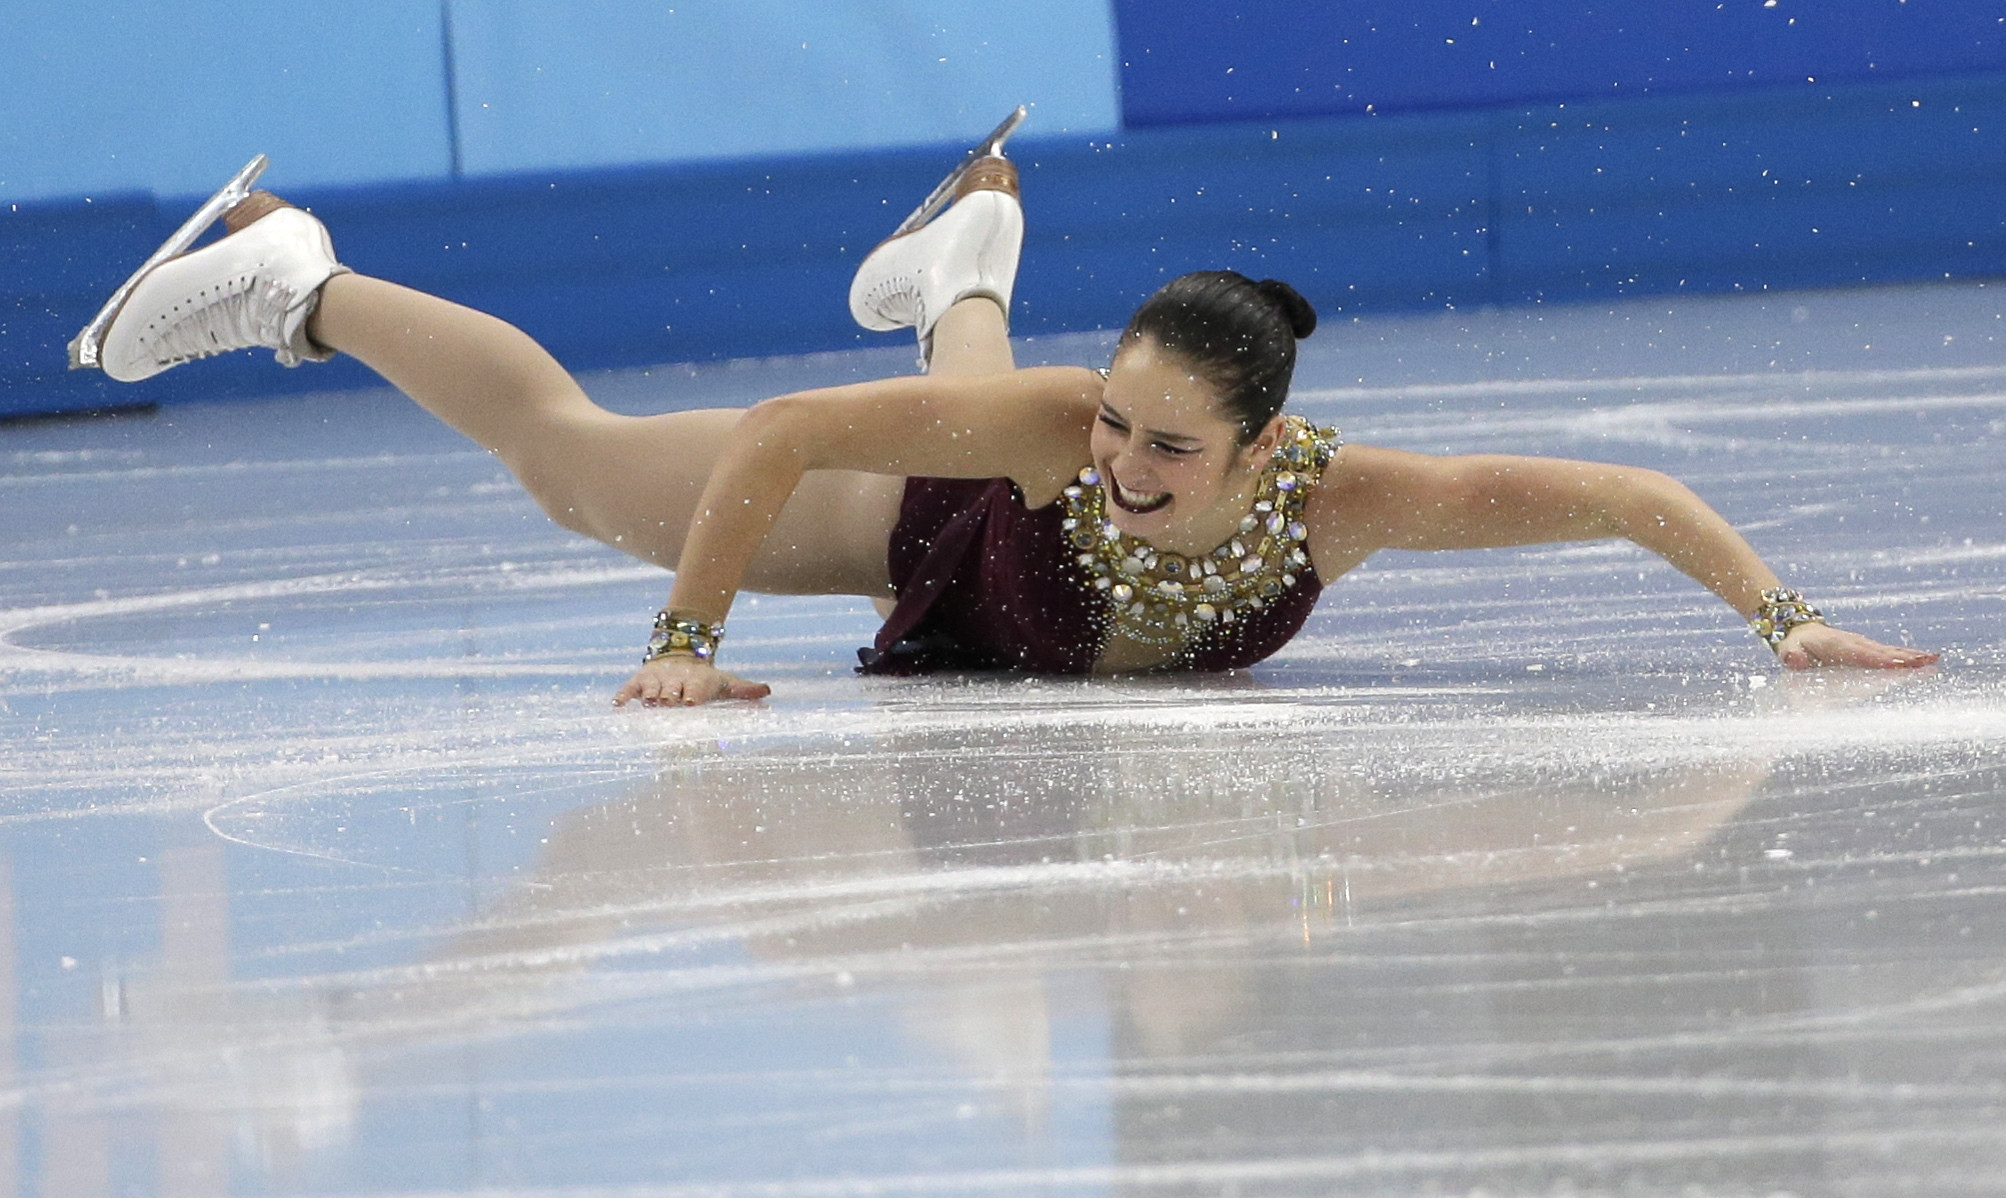 2006x1198 Caitlin Osmond Canadian figure skater silver medal at the Olympic Games in  Sochi 2014